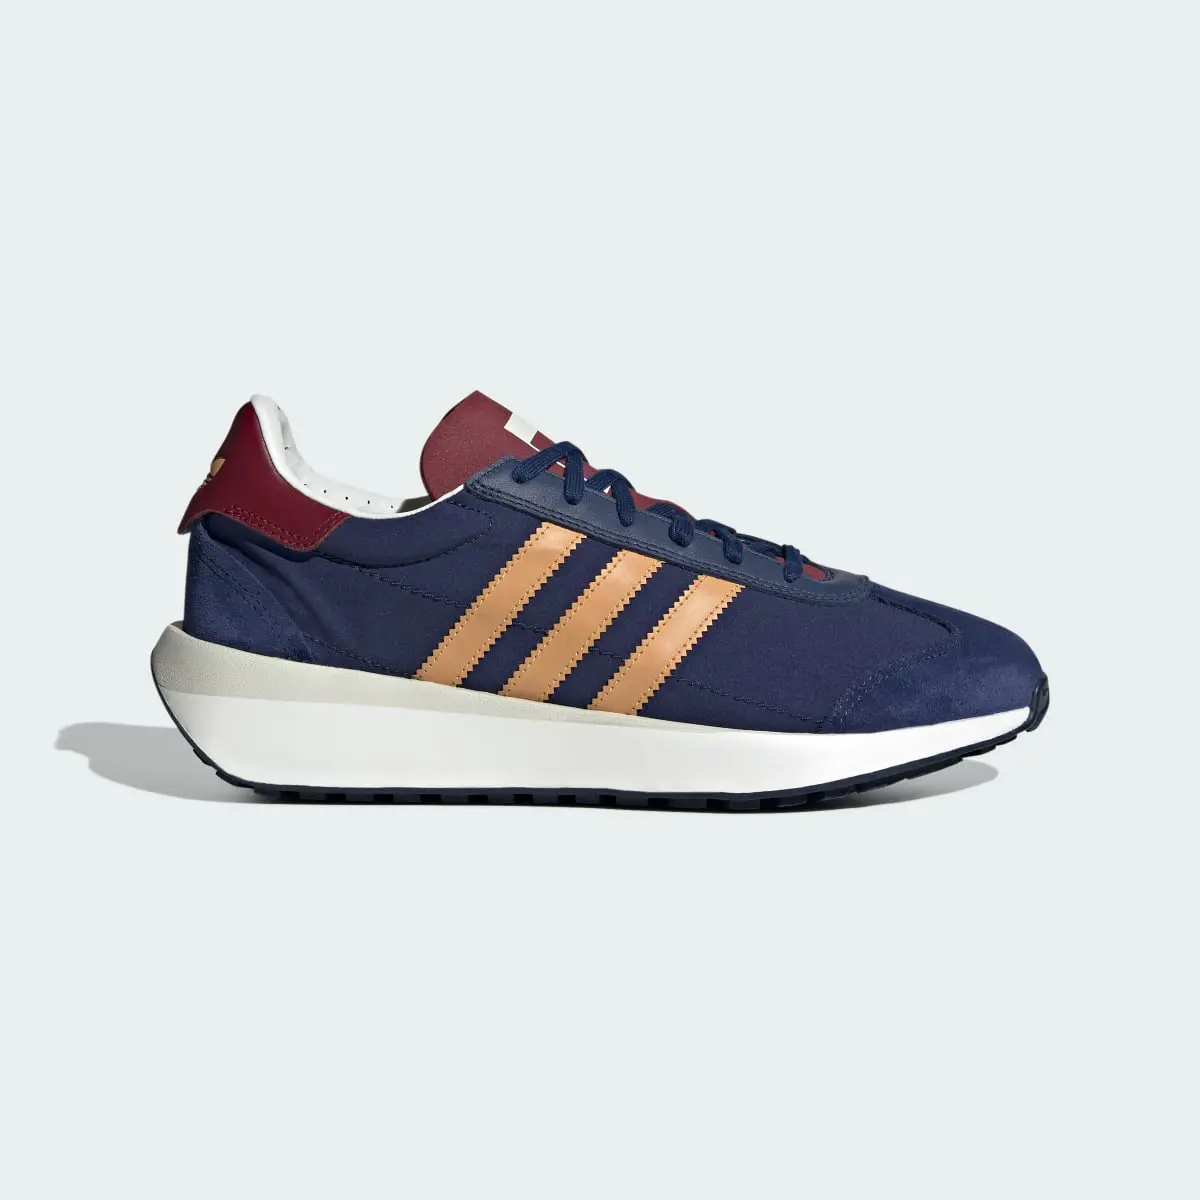 Adidas Scarpe Country XLG. 2